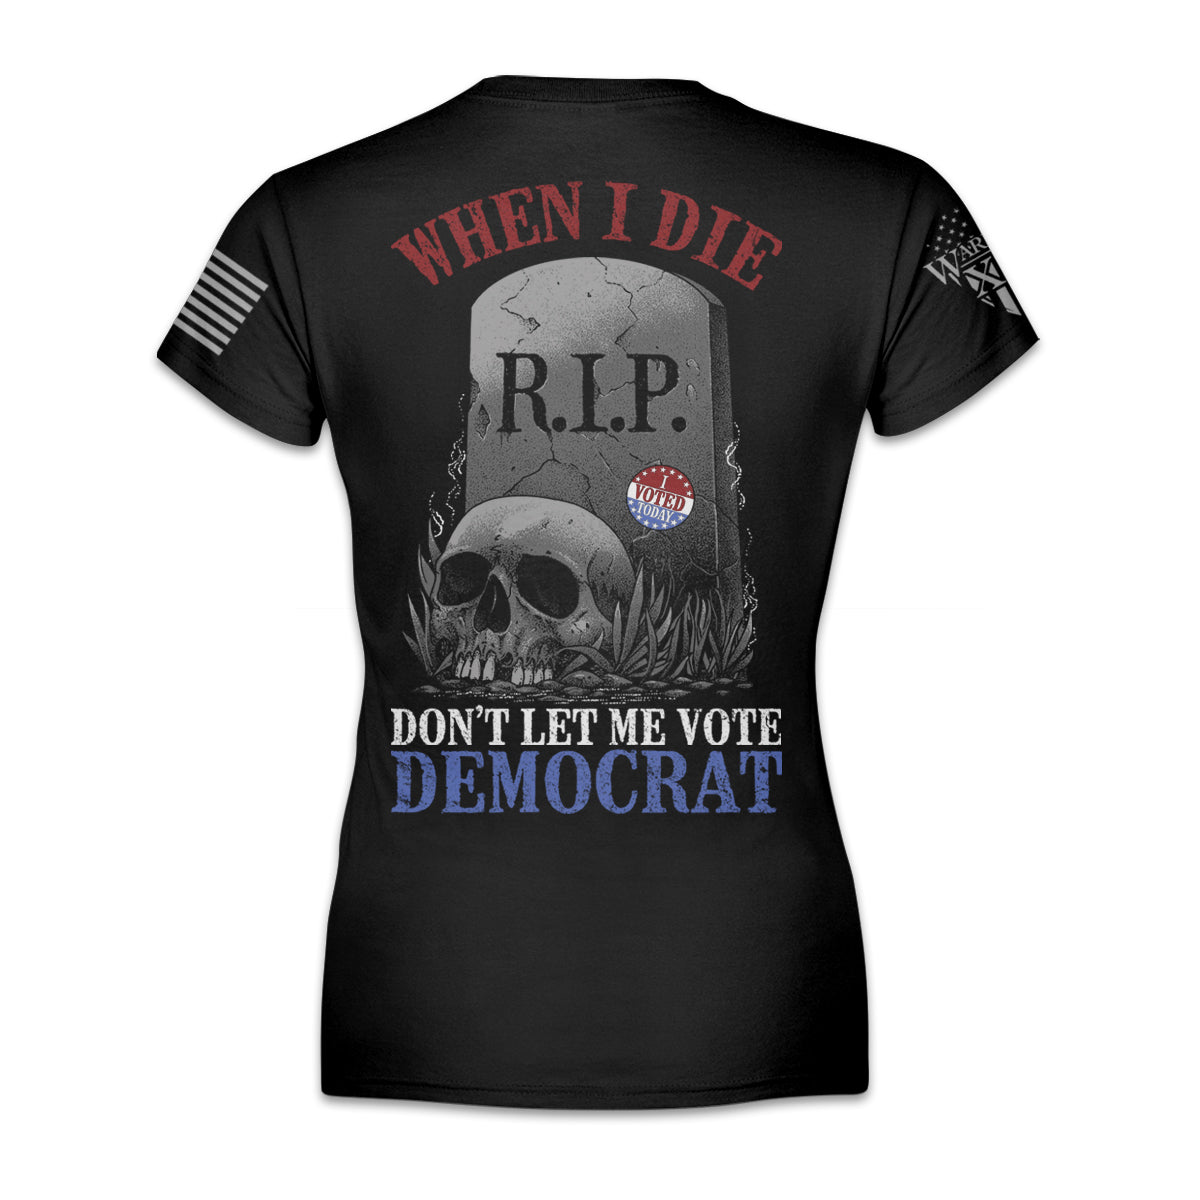 A black women's relaxed t-shirt with the words "When I die, don't let me vote Democrat" with a gravestone and a skull printed on the back of the shirt.